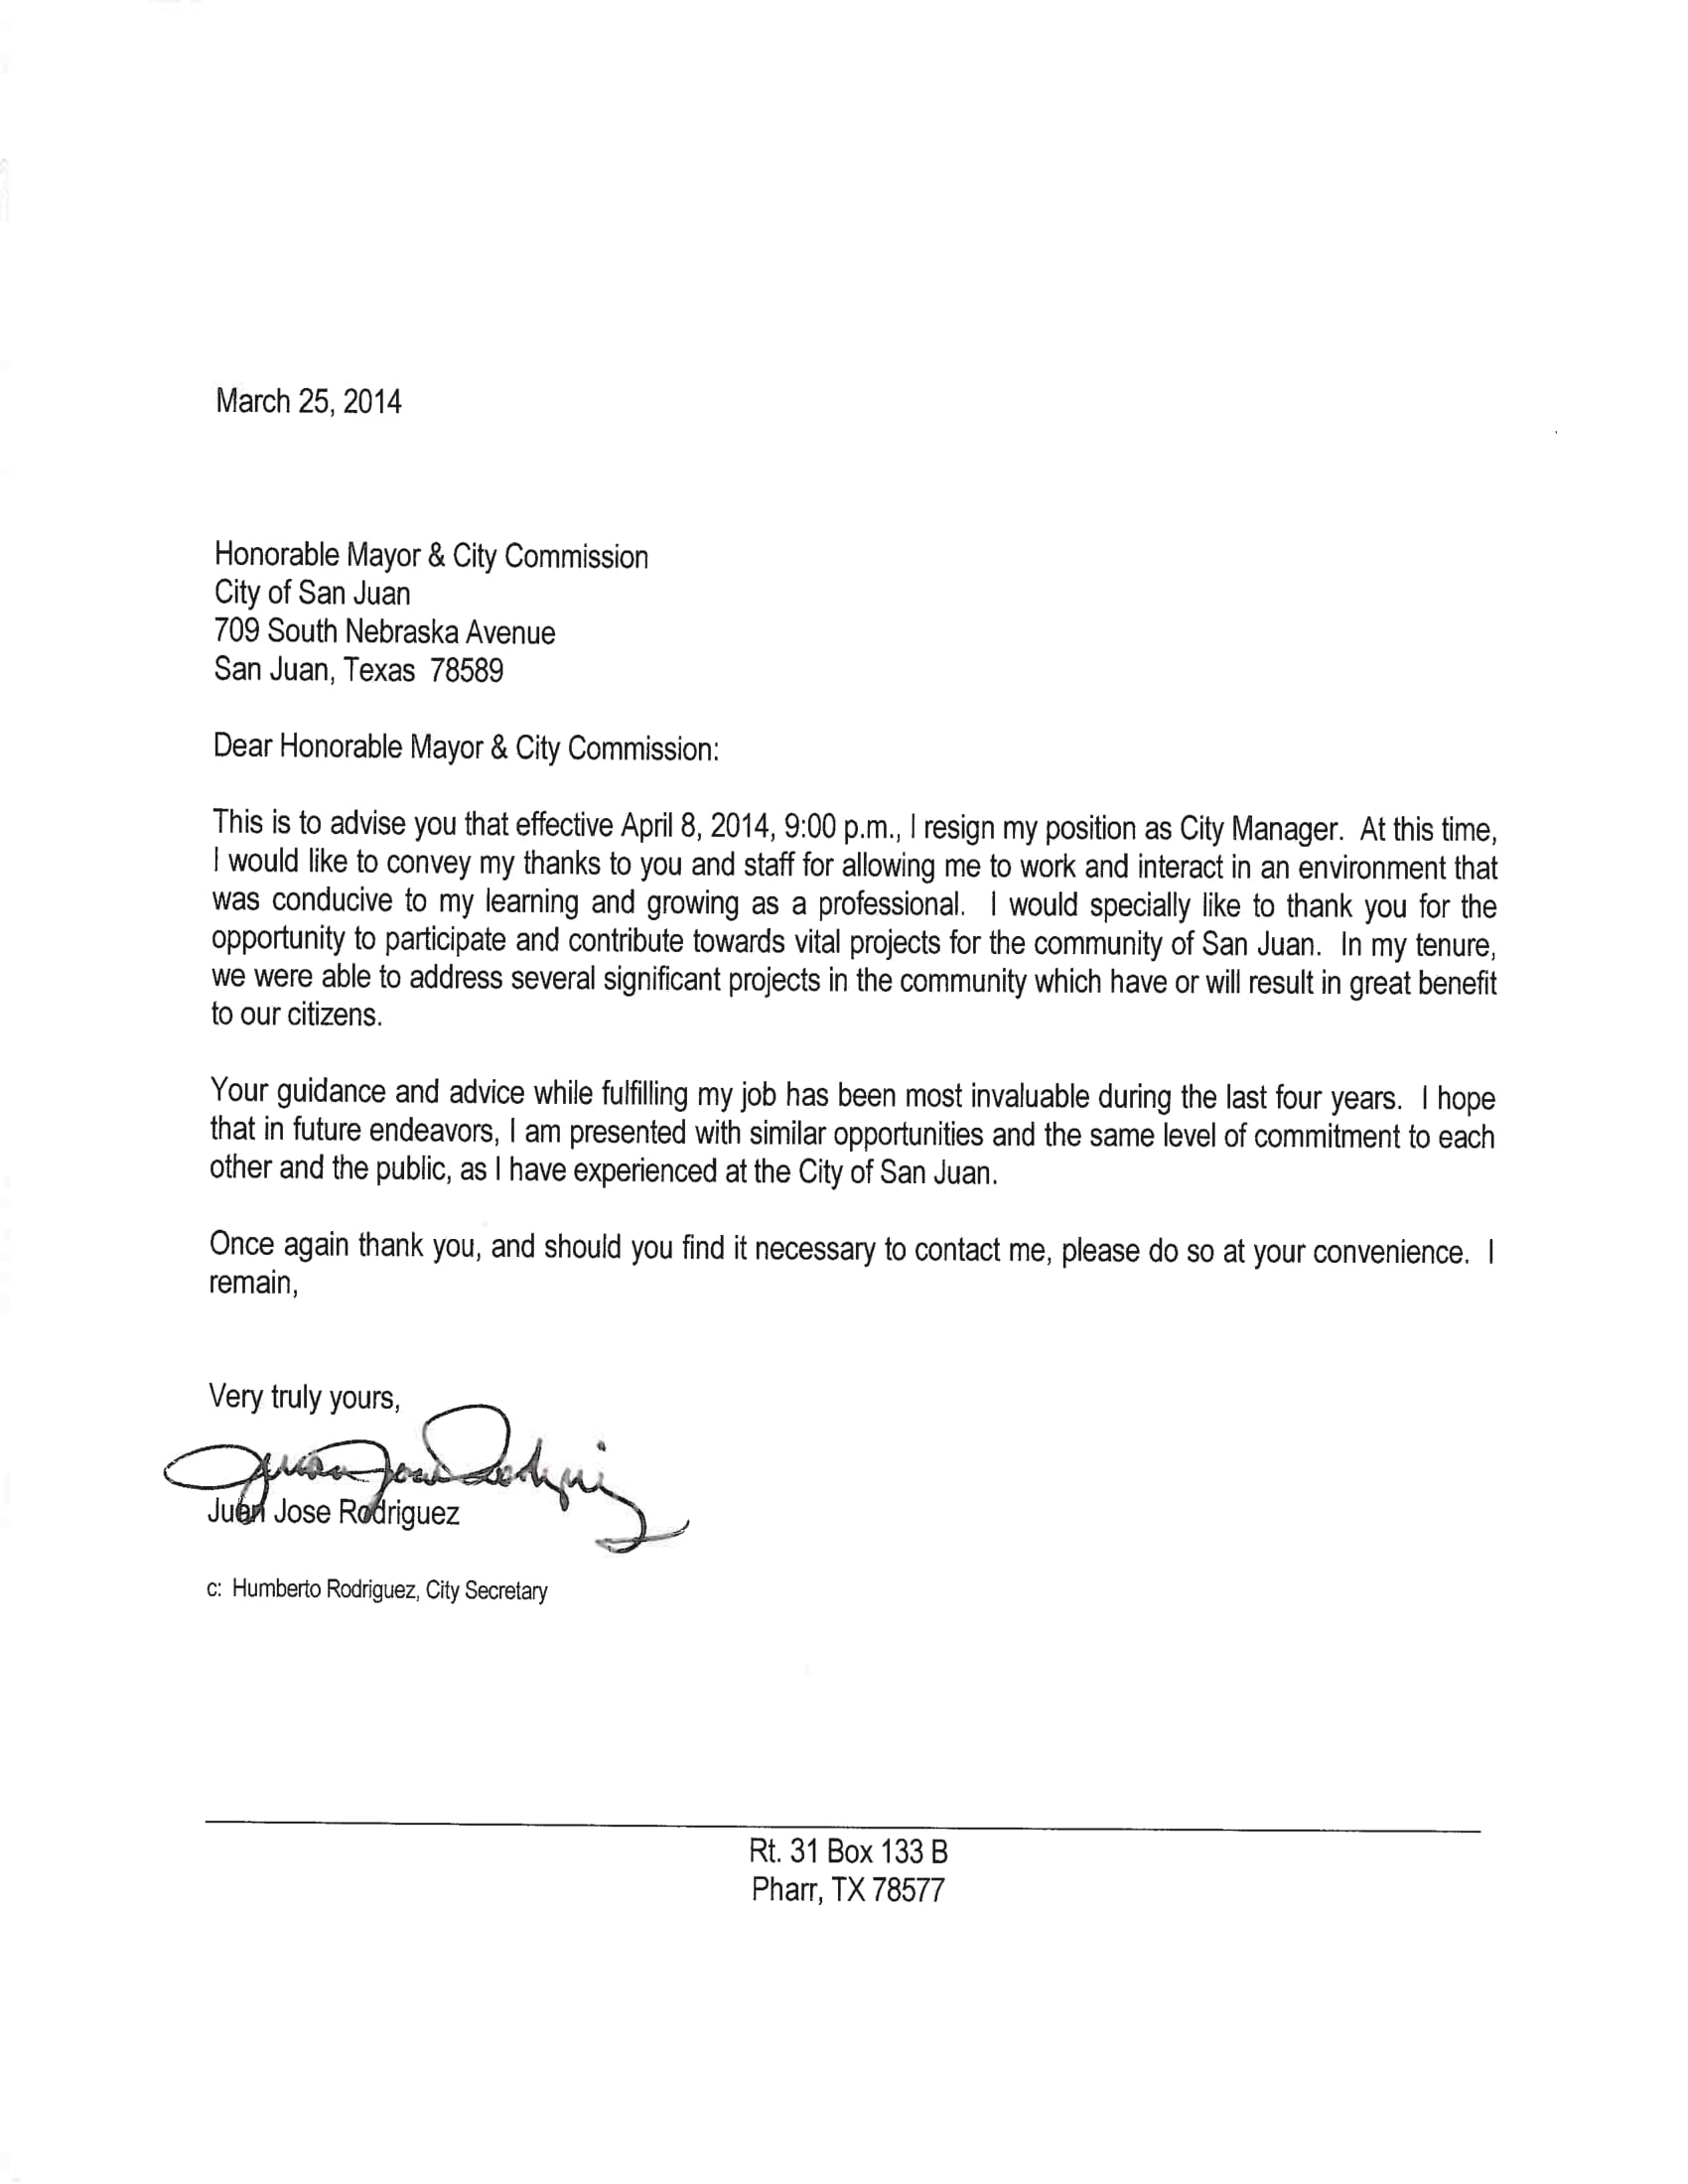 city manager resignation letter example